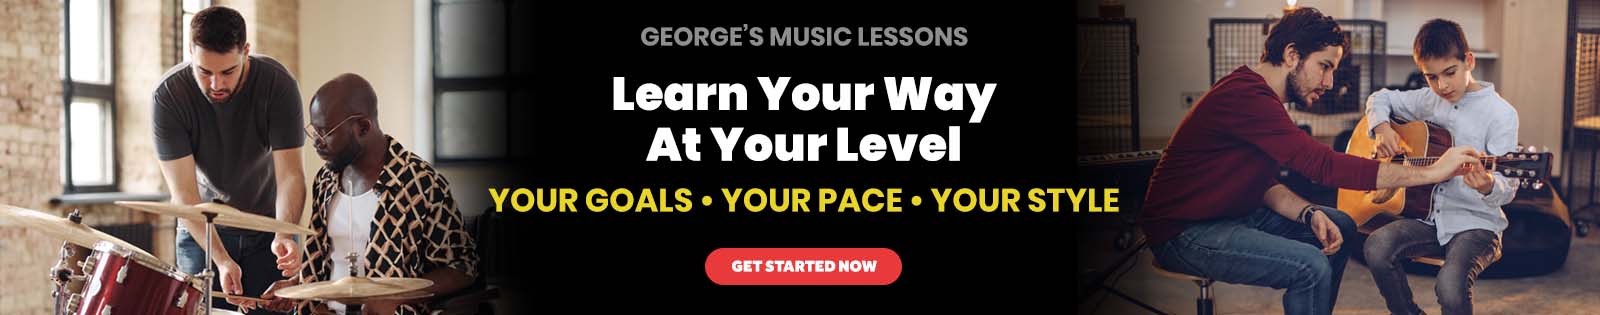 Lessons at George's Music